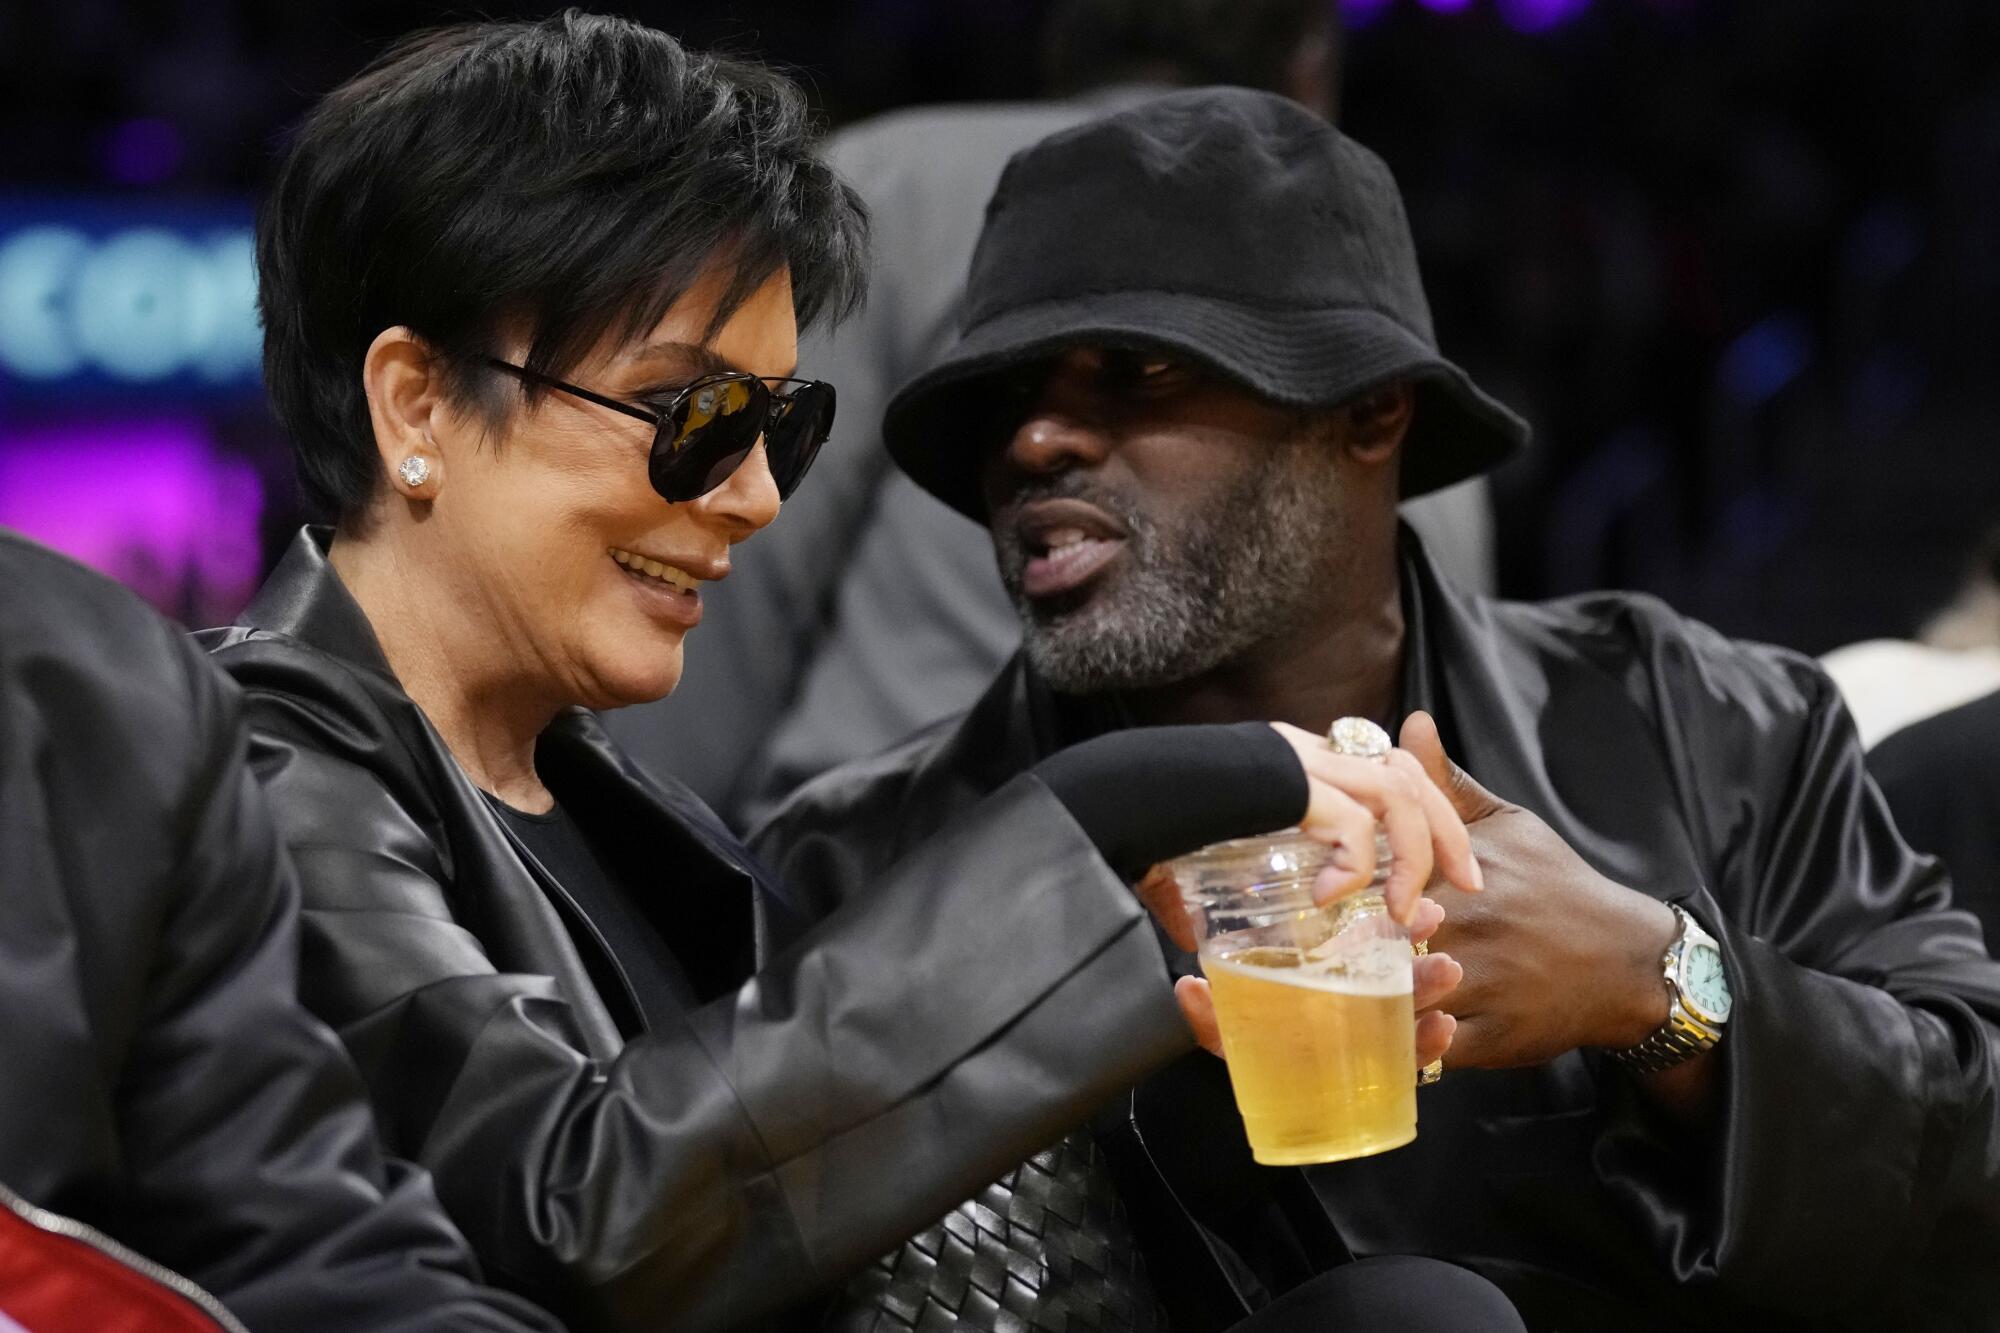 Kris Jenner sits next to boyfriend Corey Gamble in the second half of Game 4 of the NBA basketball Western Conference Final.